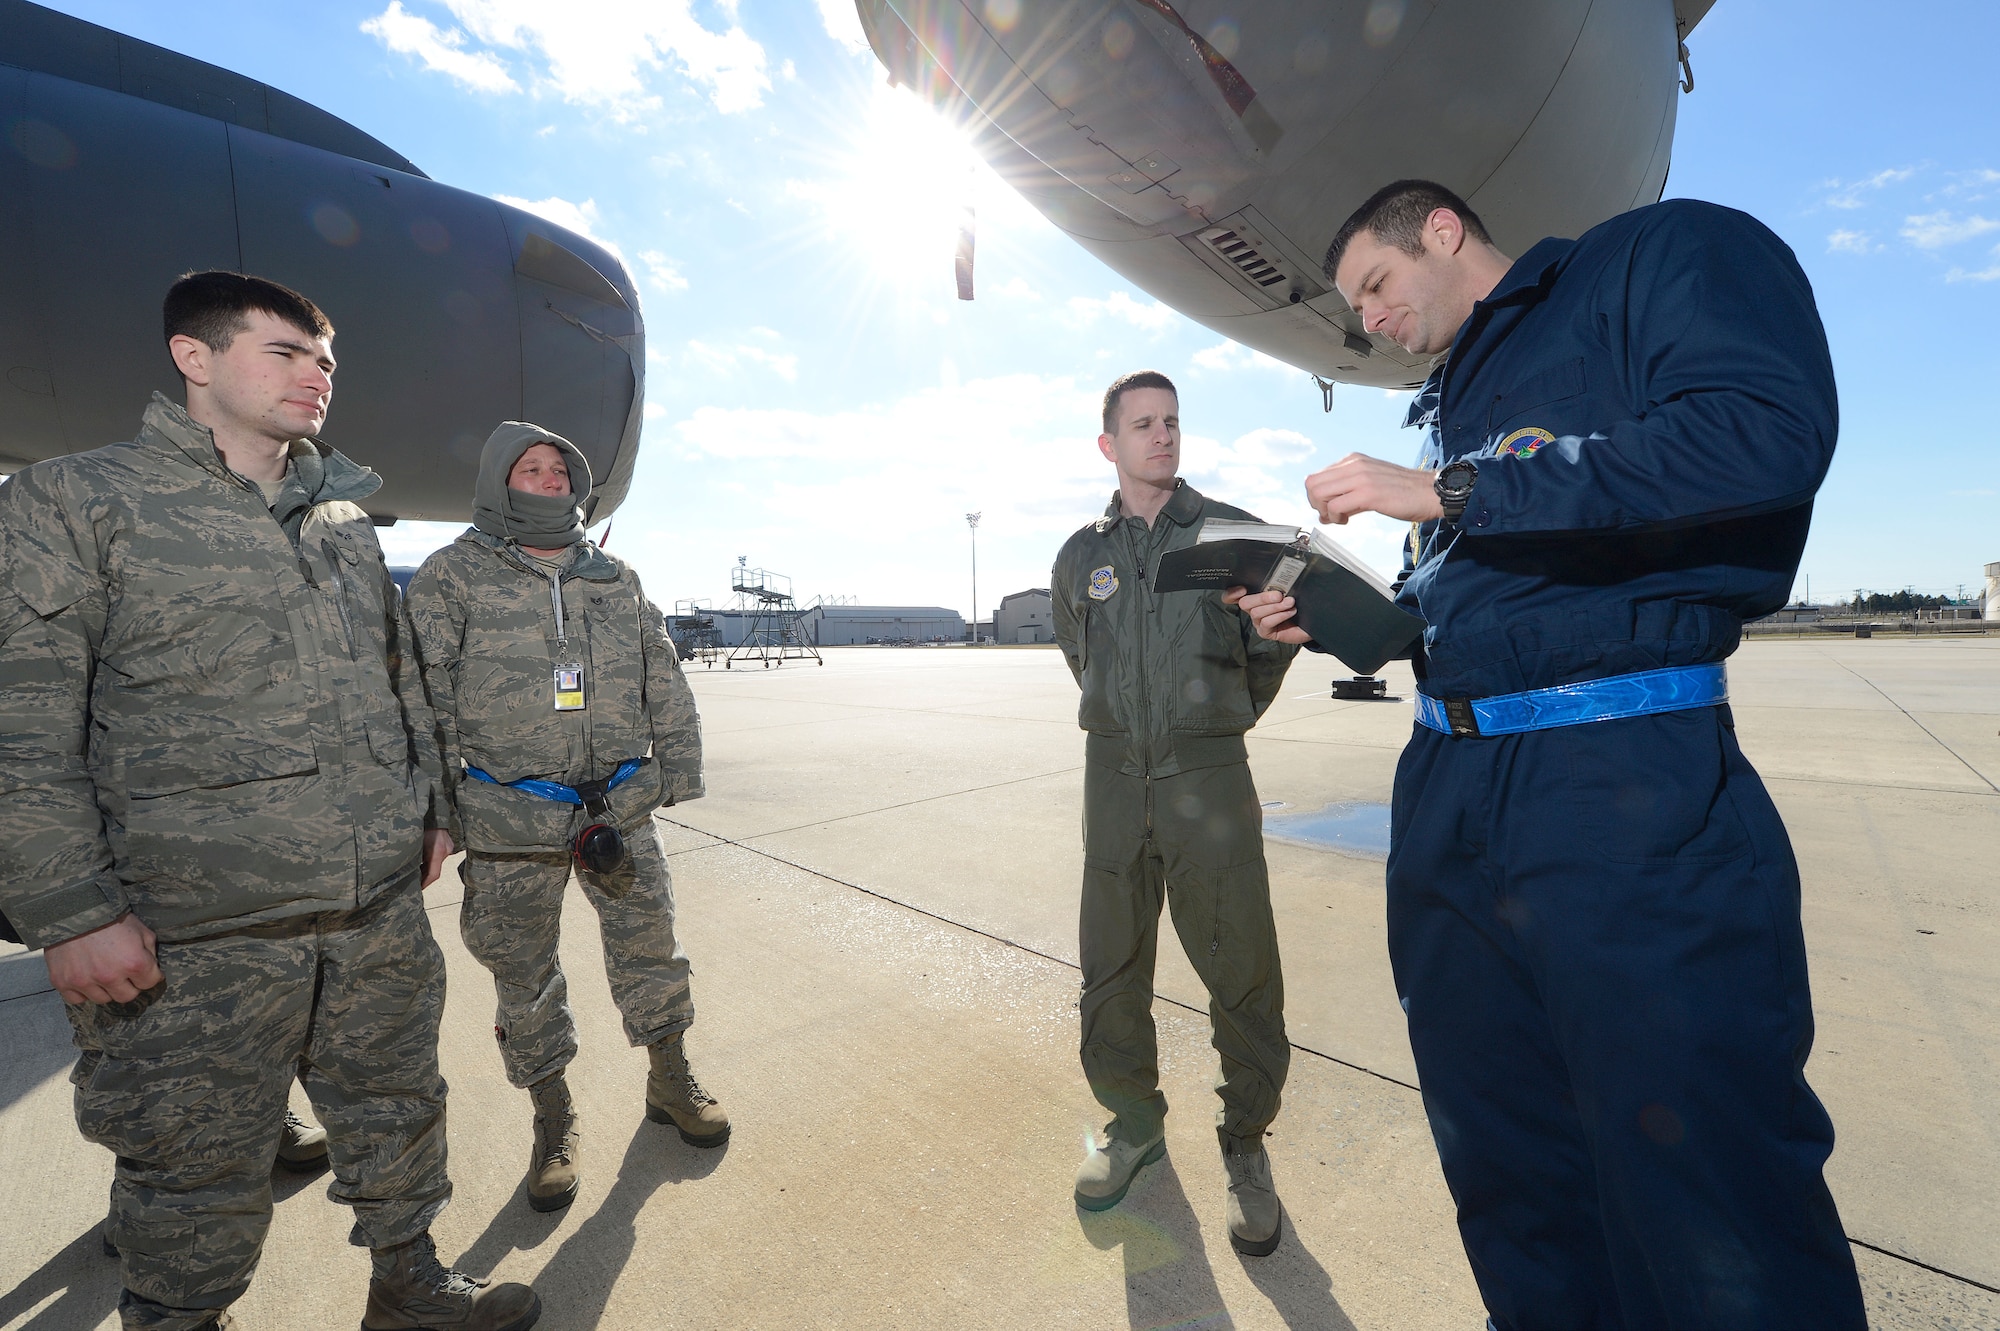 Tech. Sgt. William Goede, (right) 736th Aircraft Maintenance Squadron dedicated crew chief, reviews a technical order while standing underneath the left wing of a C-17A Globemaster III at Dover Air Force Base, Del. on Jan. 18, 2013. Goede is flanked by 1st Lt. Zack Jaeger, 3rd Airlift Squadron training officer. Jaeger and Goede participated in an operational maintenance immersion program to help aircrew and crew chiefs understand each other's roles and responsibilities. Additional aircraft maintenance specialists, Senior Airman Aaron Crompton and Staff Sgt. Steven Weaver, also listen to the discussion. This image has been digitally altered to remove sensitive information contained on an identification badge. U.S.Air Force photo/Greg L. Davis